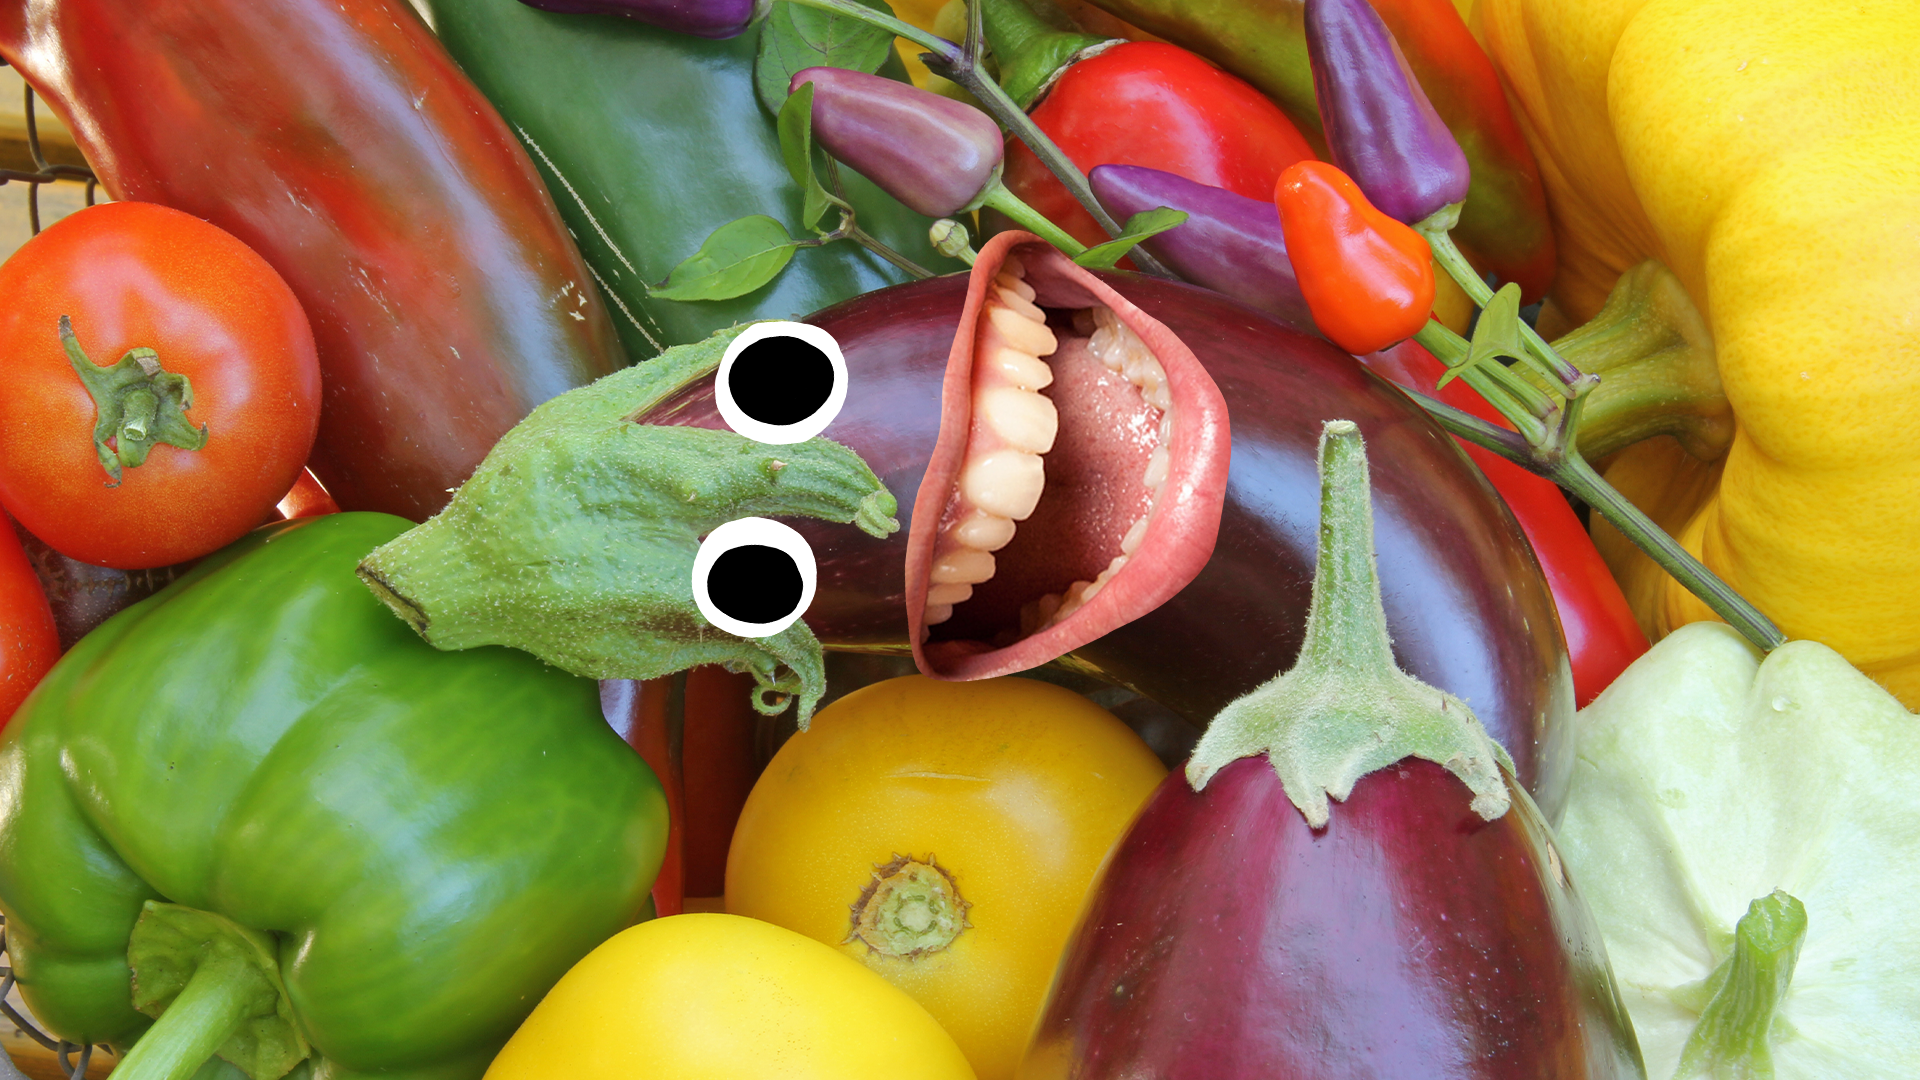 Selection of vegetables, one with goofy face